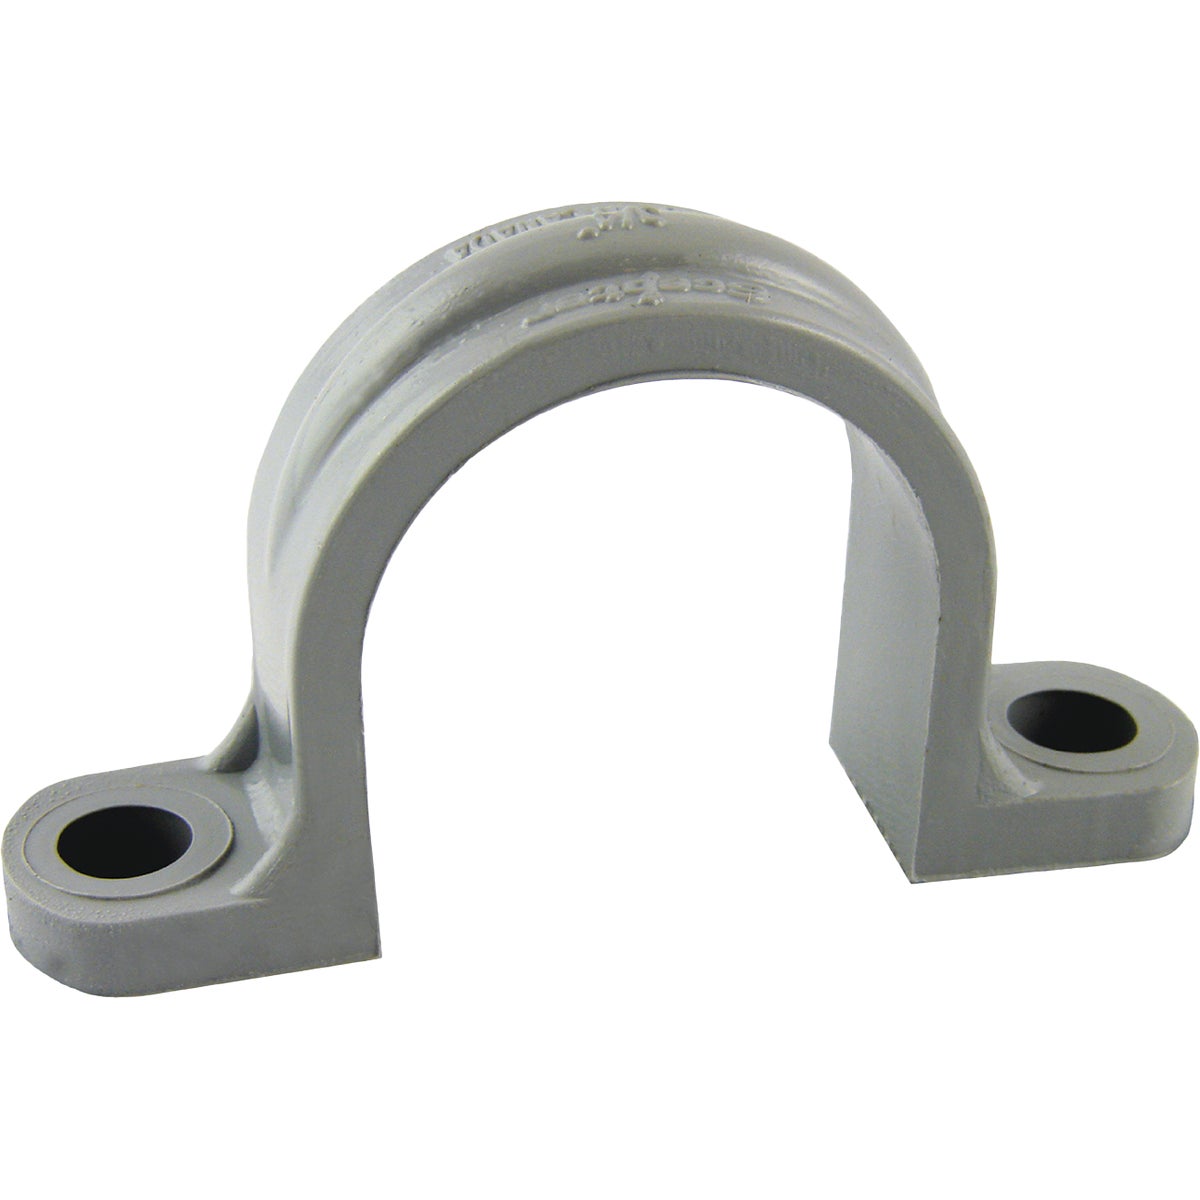 IPEX Kraloy 2 1/2 In. 2-Hole PVC Pipe Strap